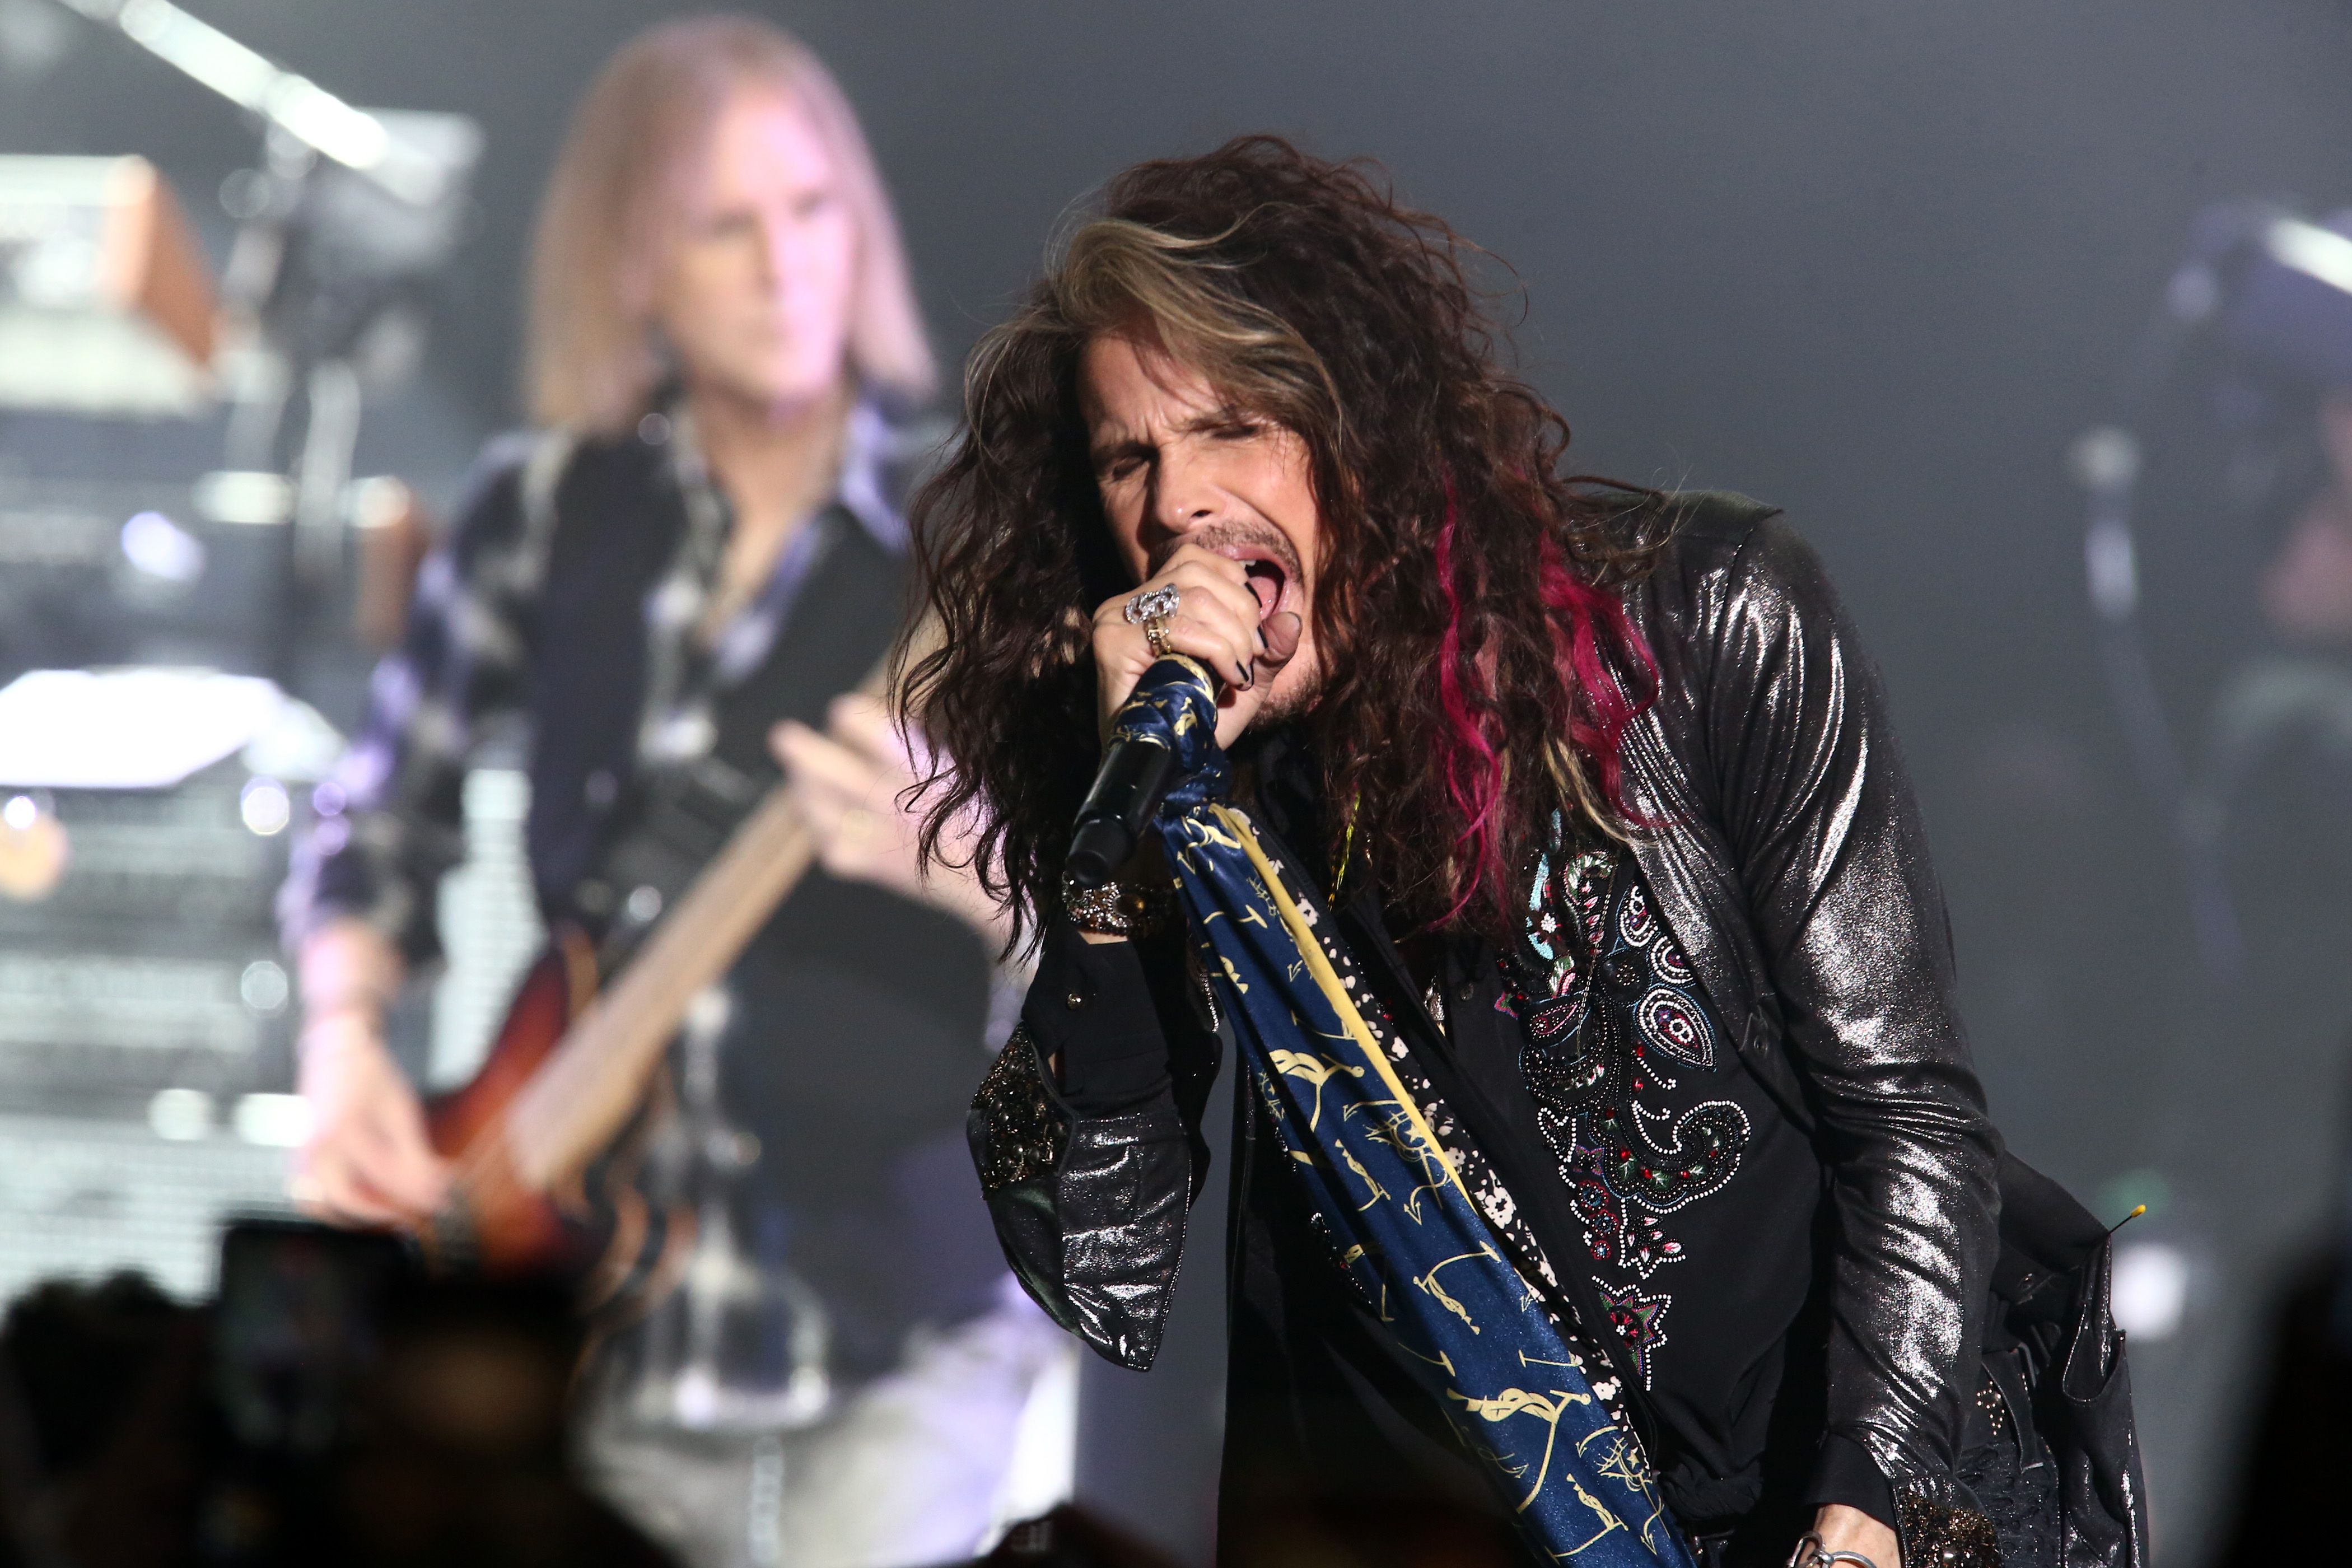 LOS ANGELES, CA - FEBRUARY 10: Steven Tyler performs during his Second Annual GRAMMY Awards Viewing Party to benefit Janie's Fund presented by Live Nation at Raleigh Studios on February 10, 2019 in Los Angeles, California. (Photo by Tommaso Boddi/Getty Images for Janie's Fund)